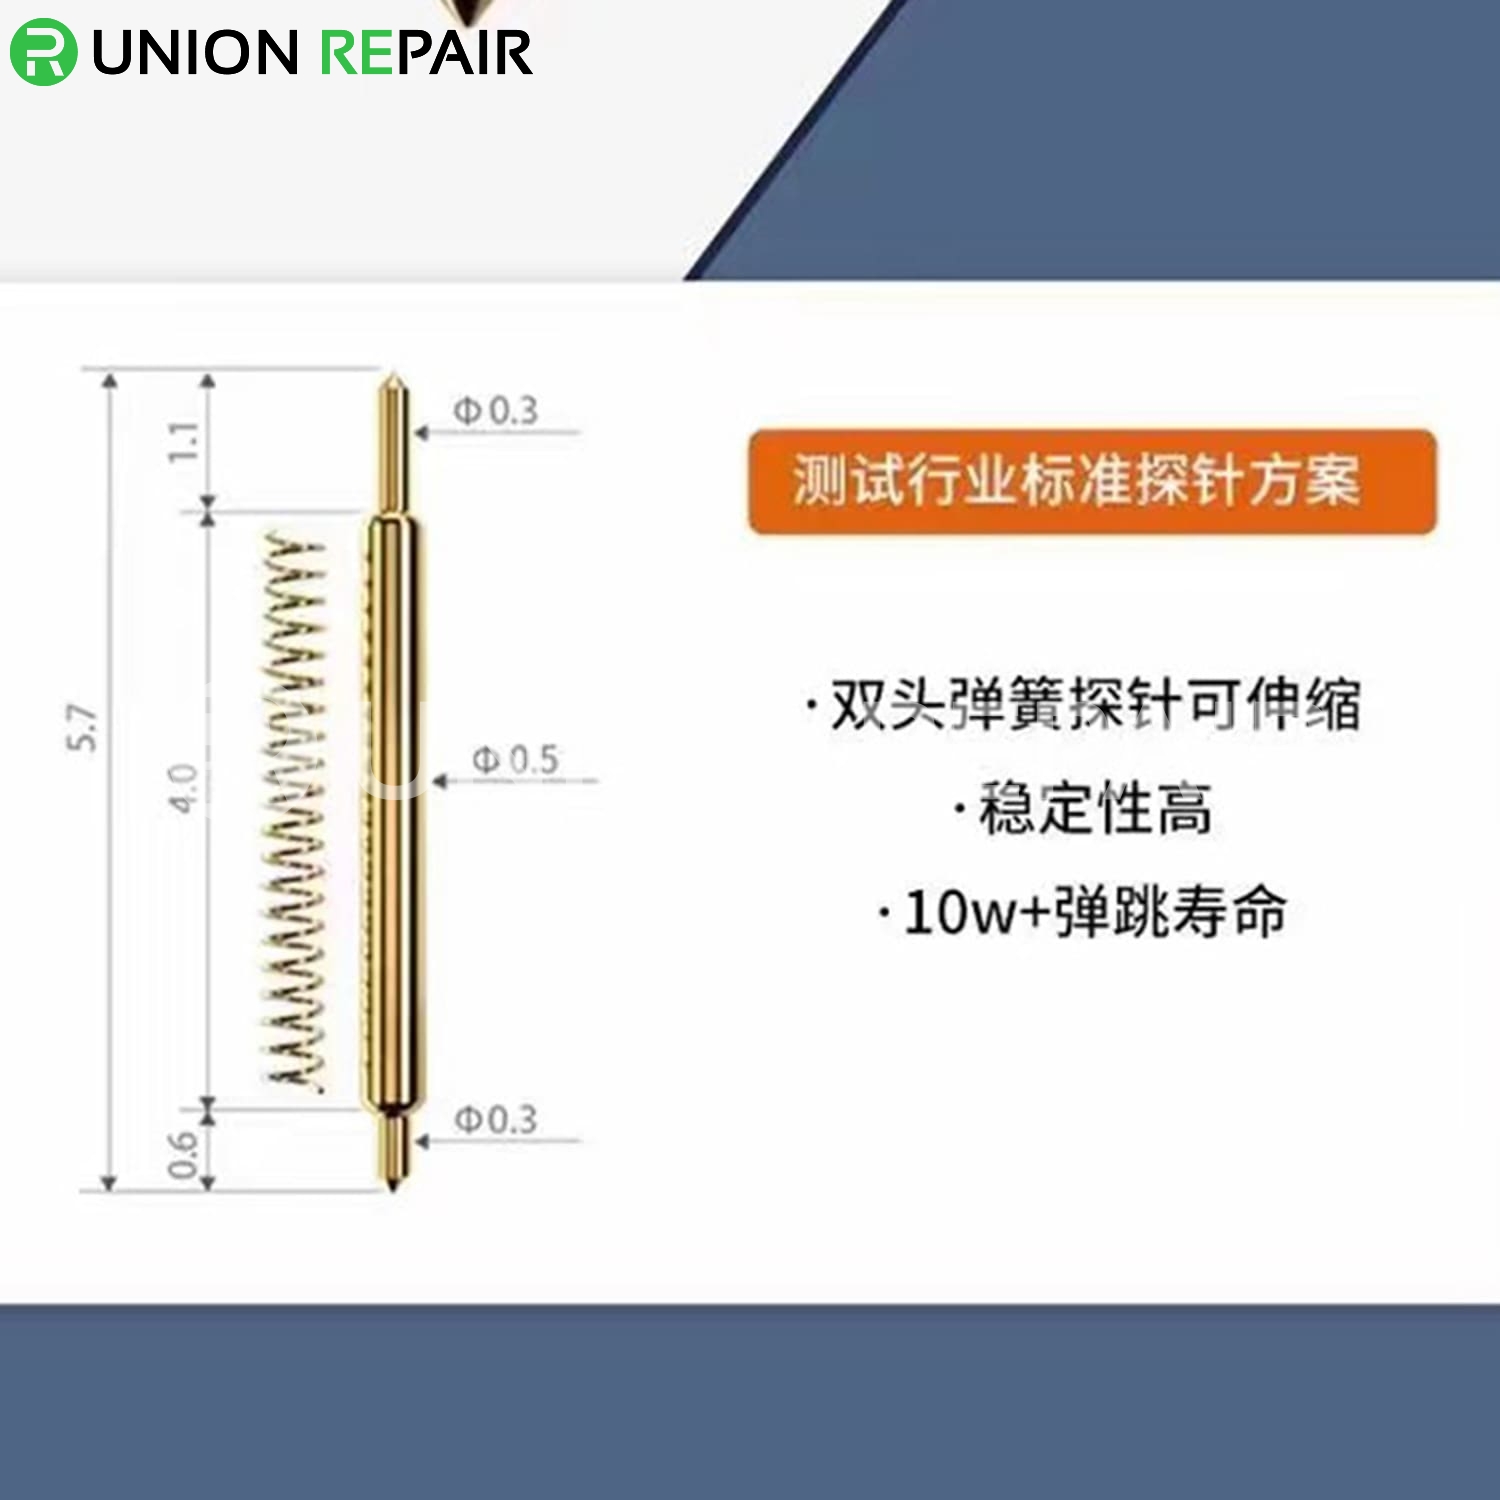 Fix-E13 Baseband EEPROM Chip Non-removal Read/Write Programmer for iPhone X-12ProMax